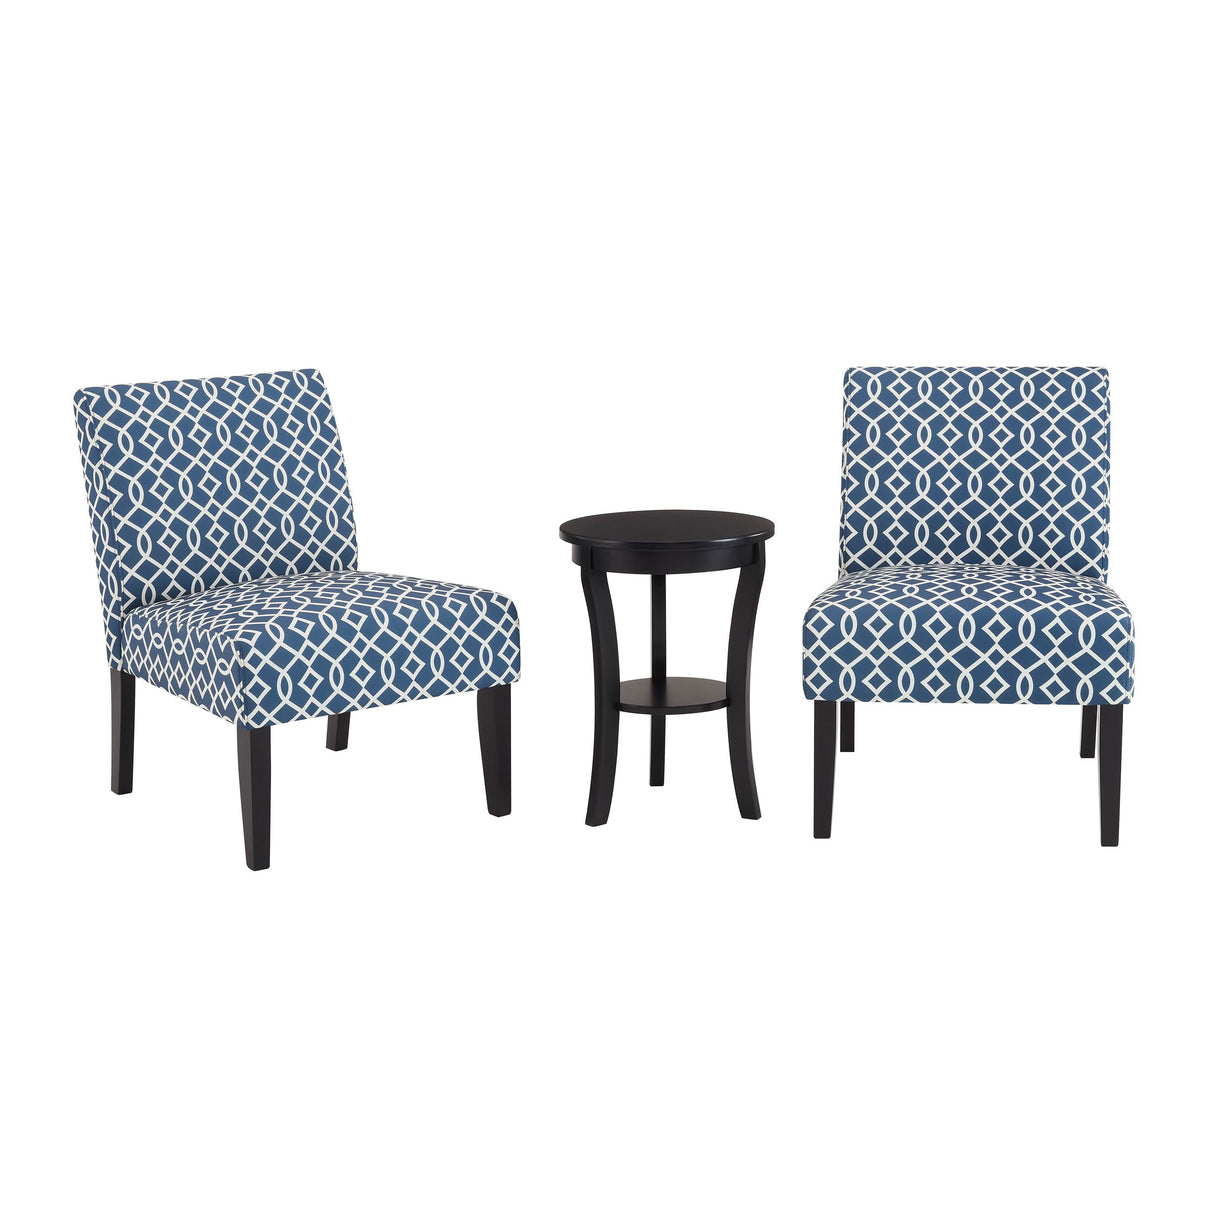 Modern Style 3pc Set Living Room Furniture 1 Side Table and 2 Chairs Blue Fabric Upholstery Wooden Legs - Home Elegance USA